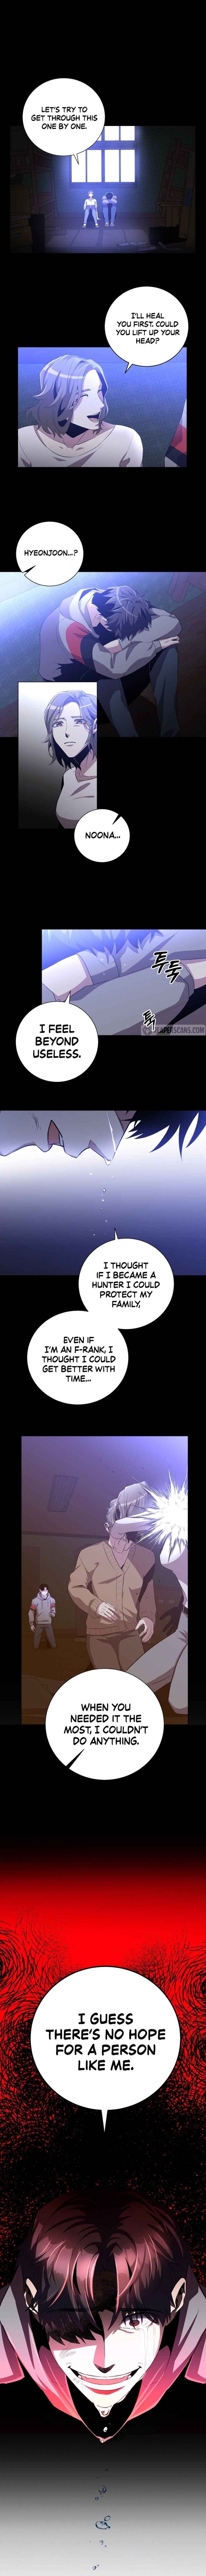 990k Ex Life Hunter Chapter 27 Page 11